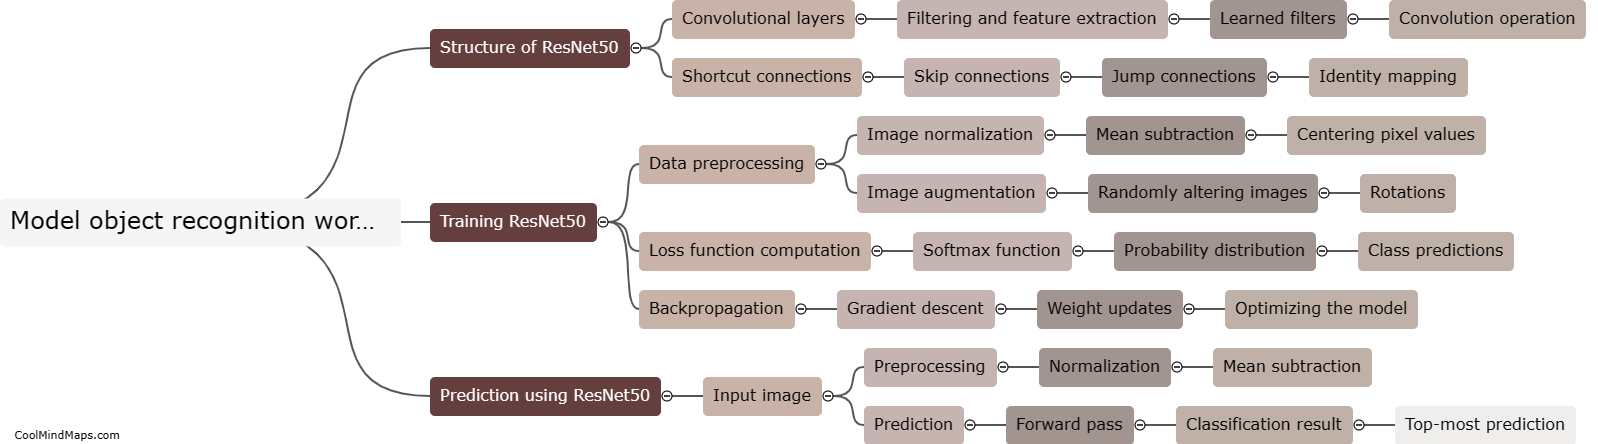 How does model object recognition work using ResNet50?